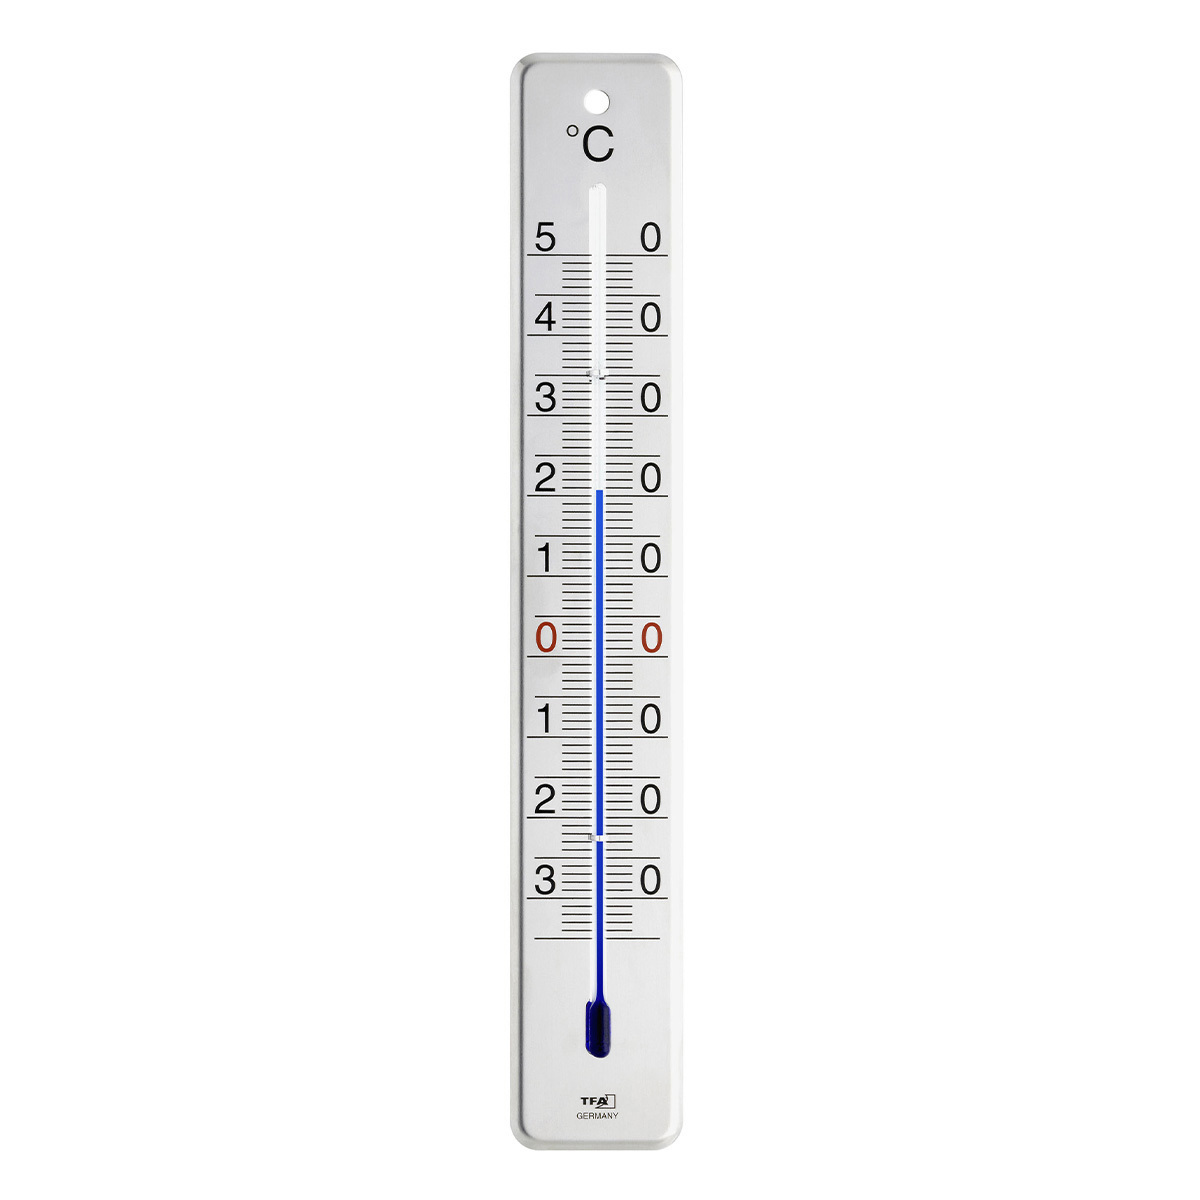 Digital Outdoor Thermometers: Outdoor Thermometers To Update You About The  Outside Weather Conditions